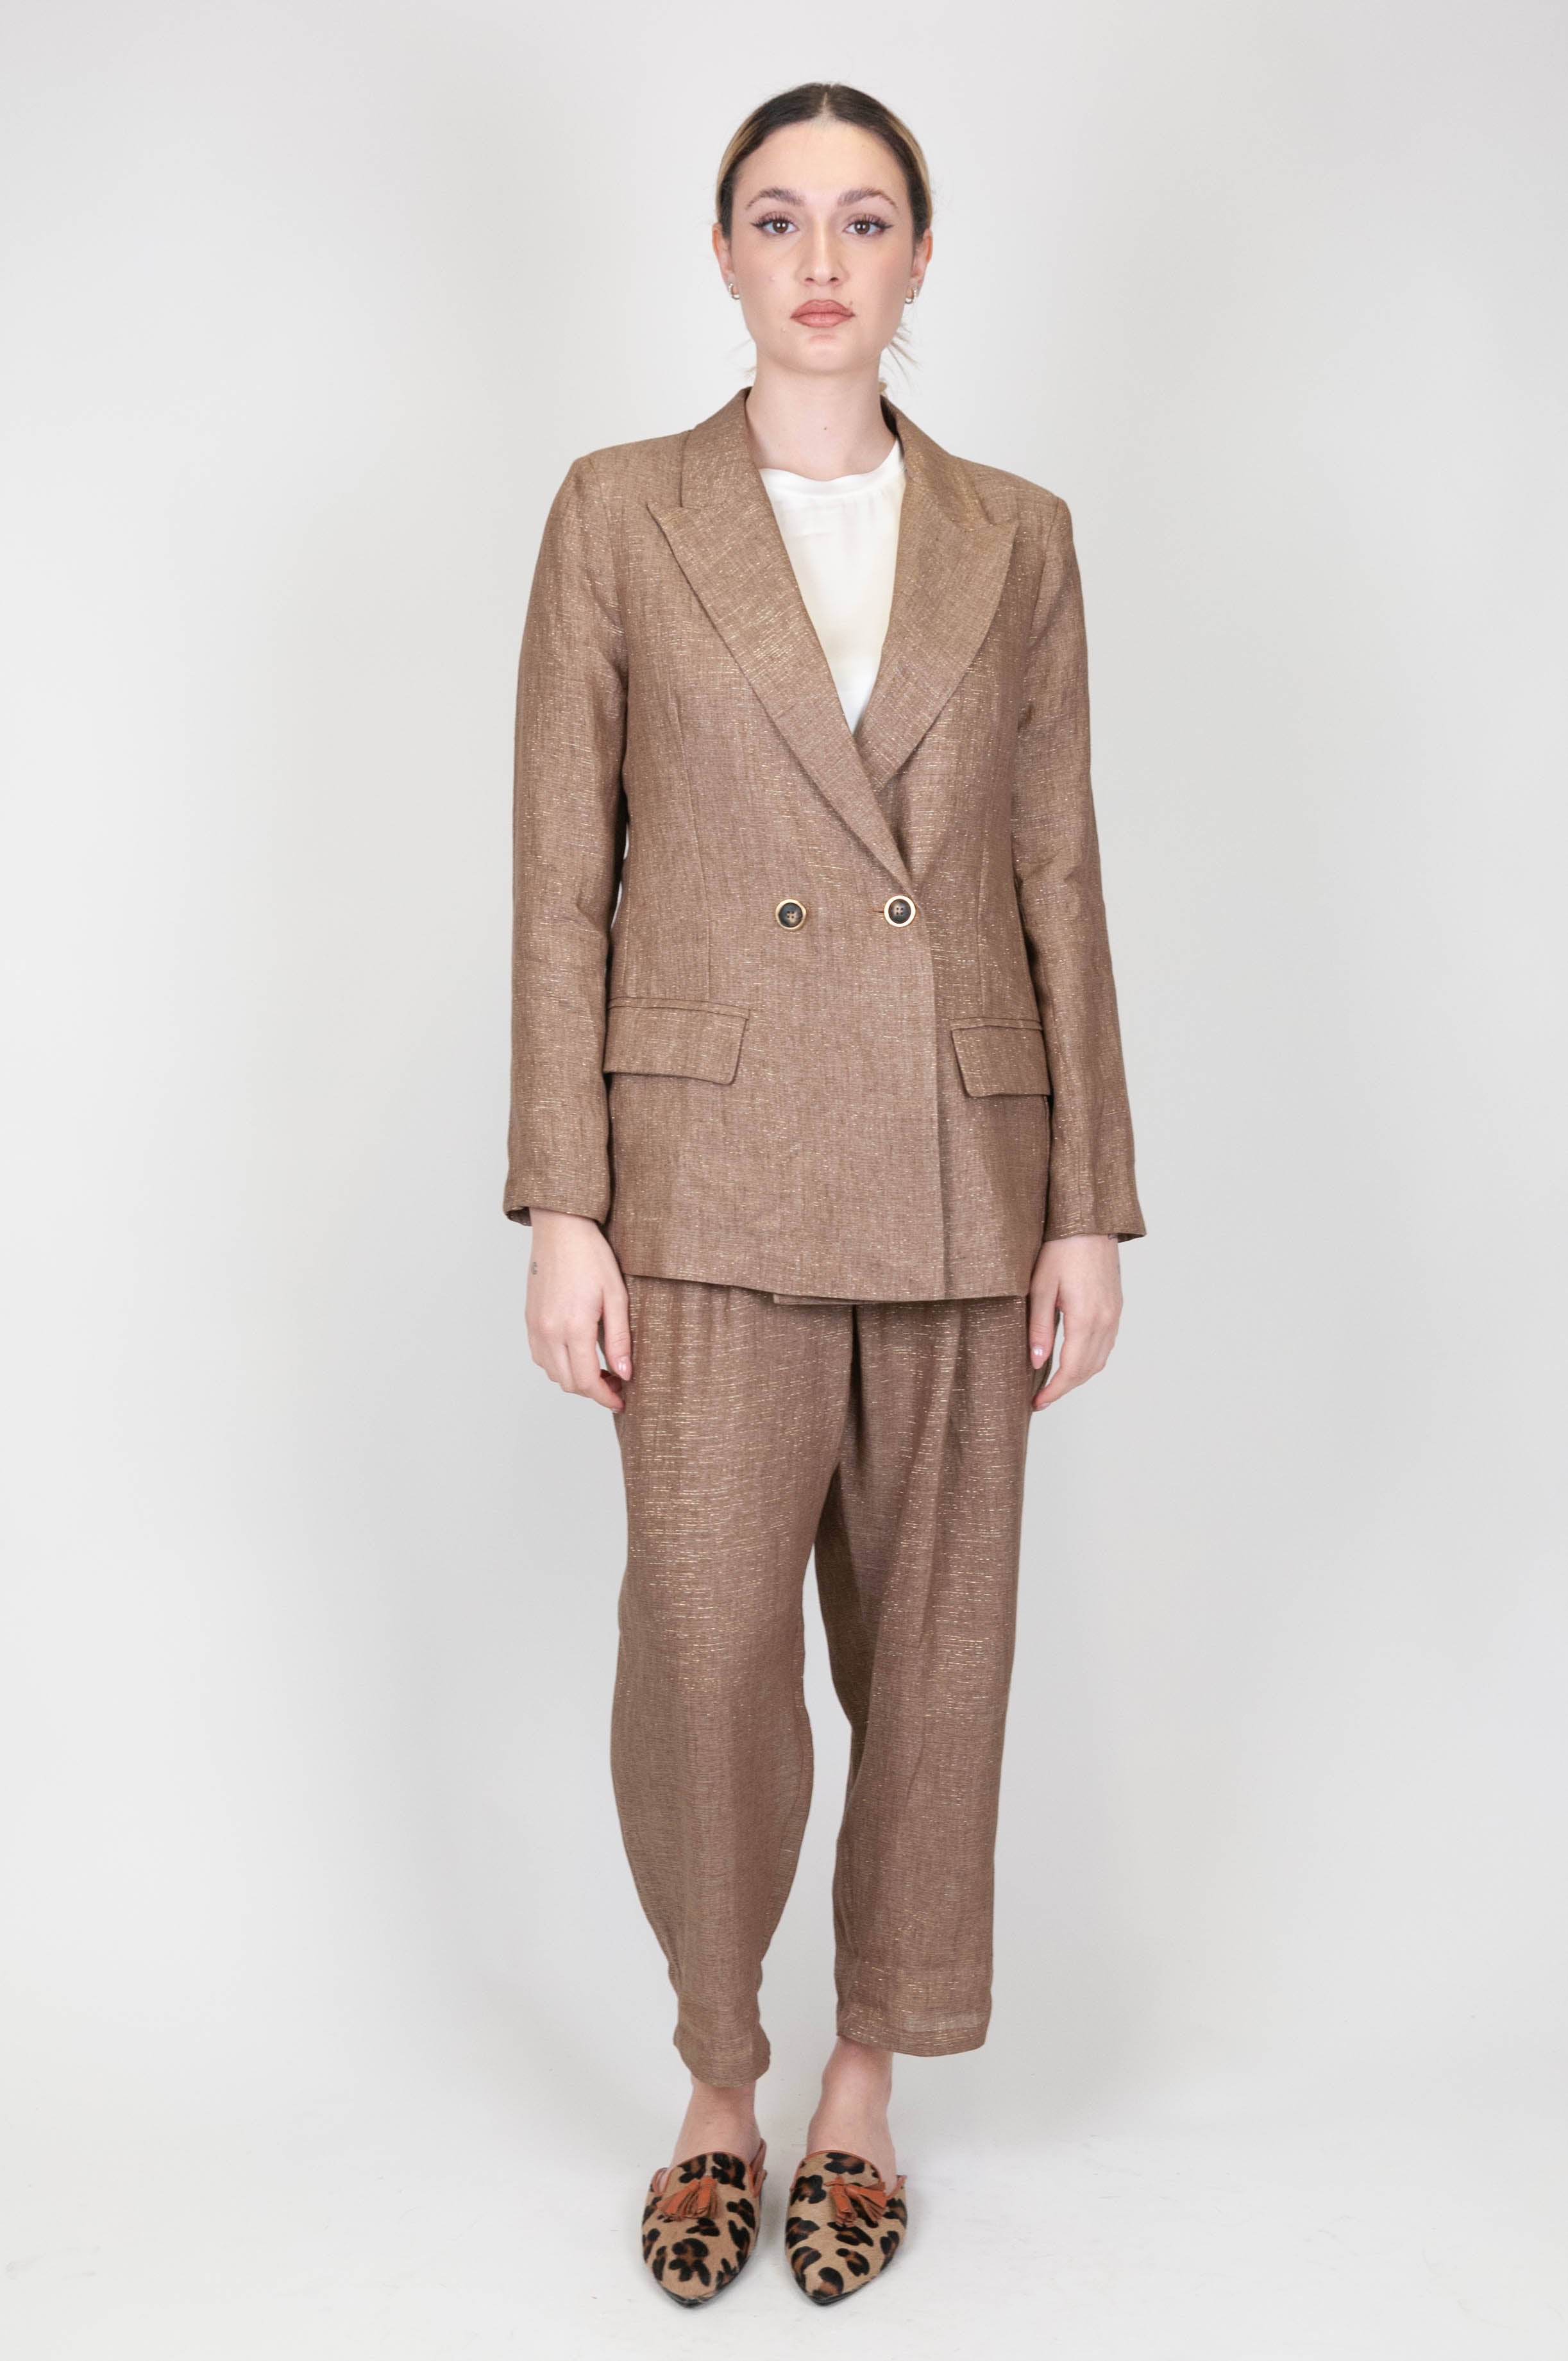 Motel - Trousers in laminated linen blend with pleats and elastic on the back